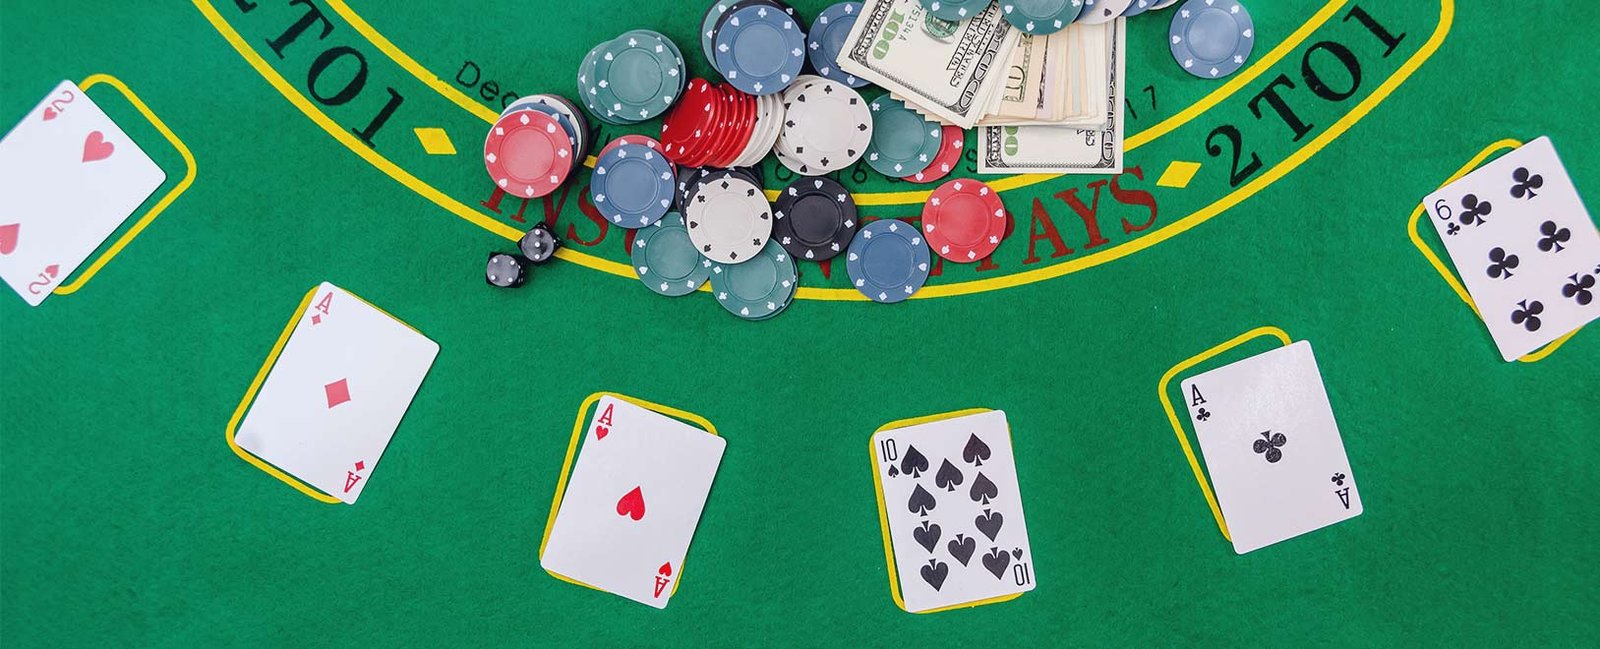 Read more about the article Hollywood Casino Arranging